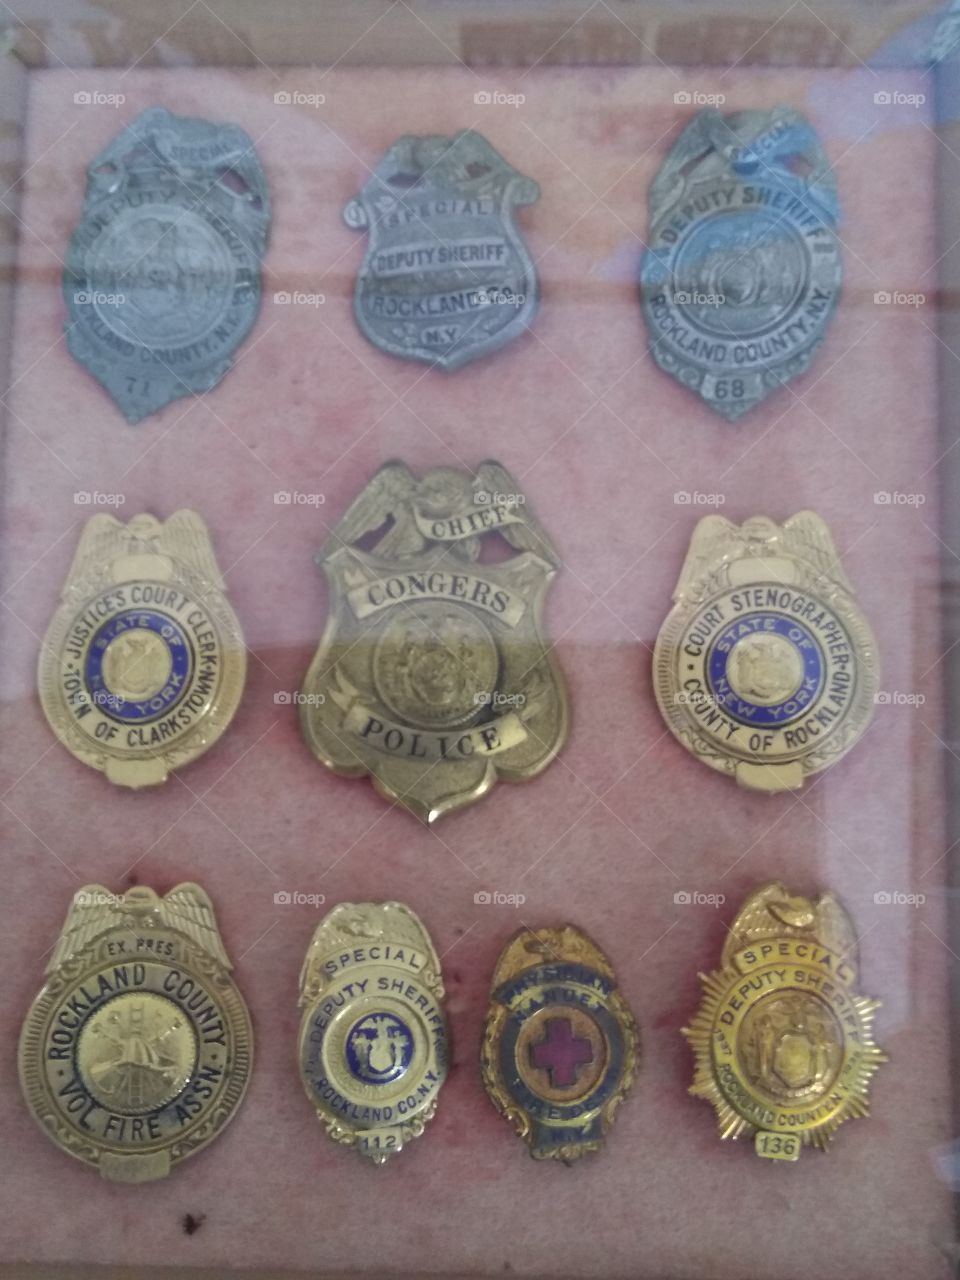 Fireman shields/badges from over the years